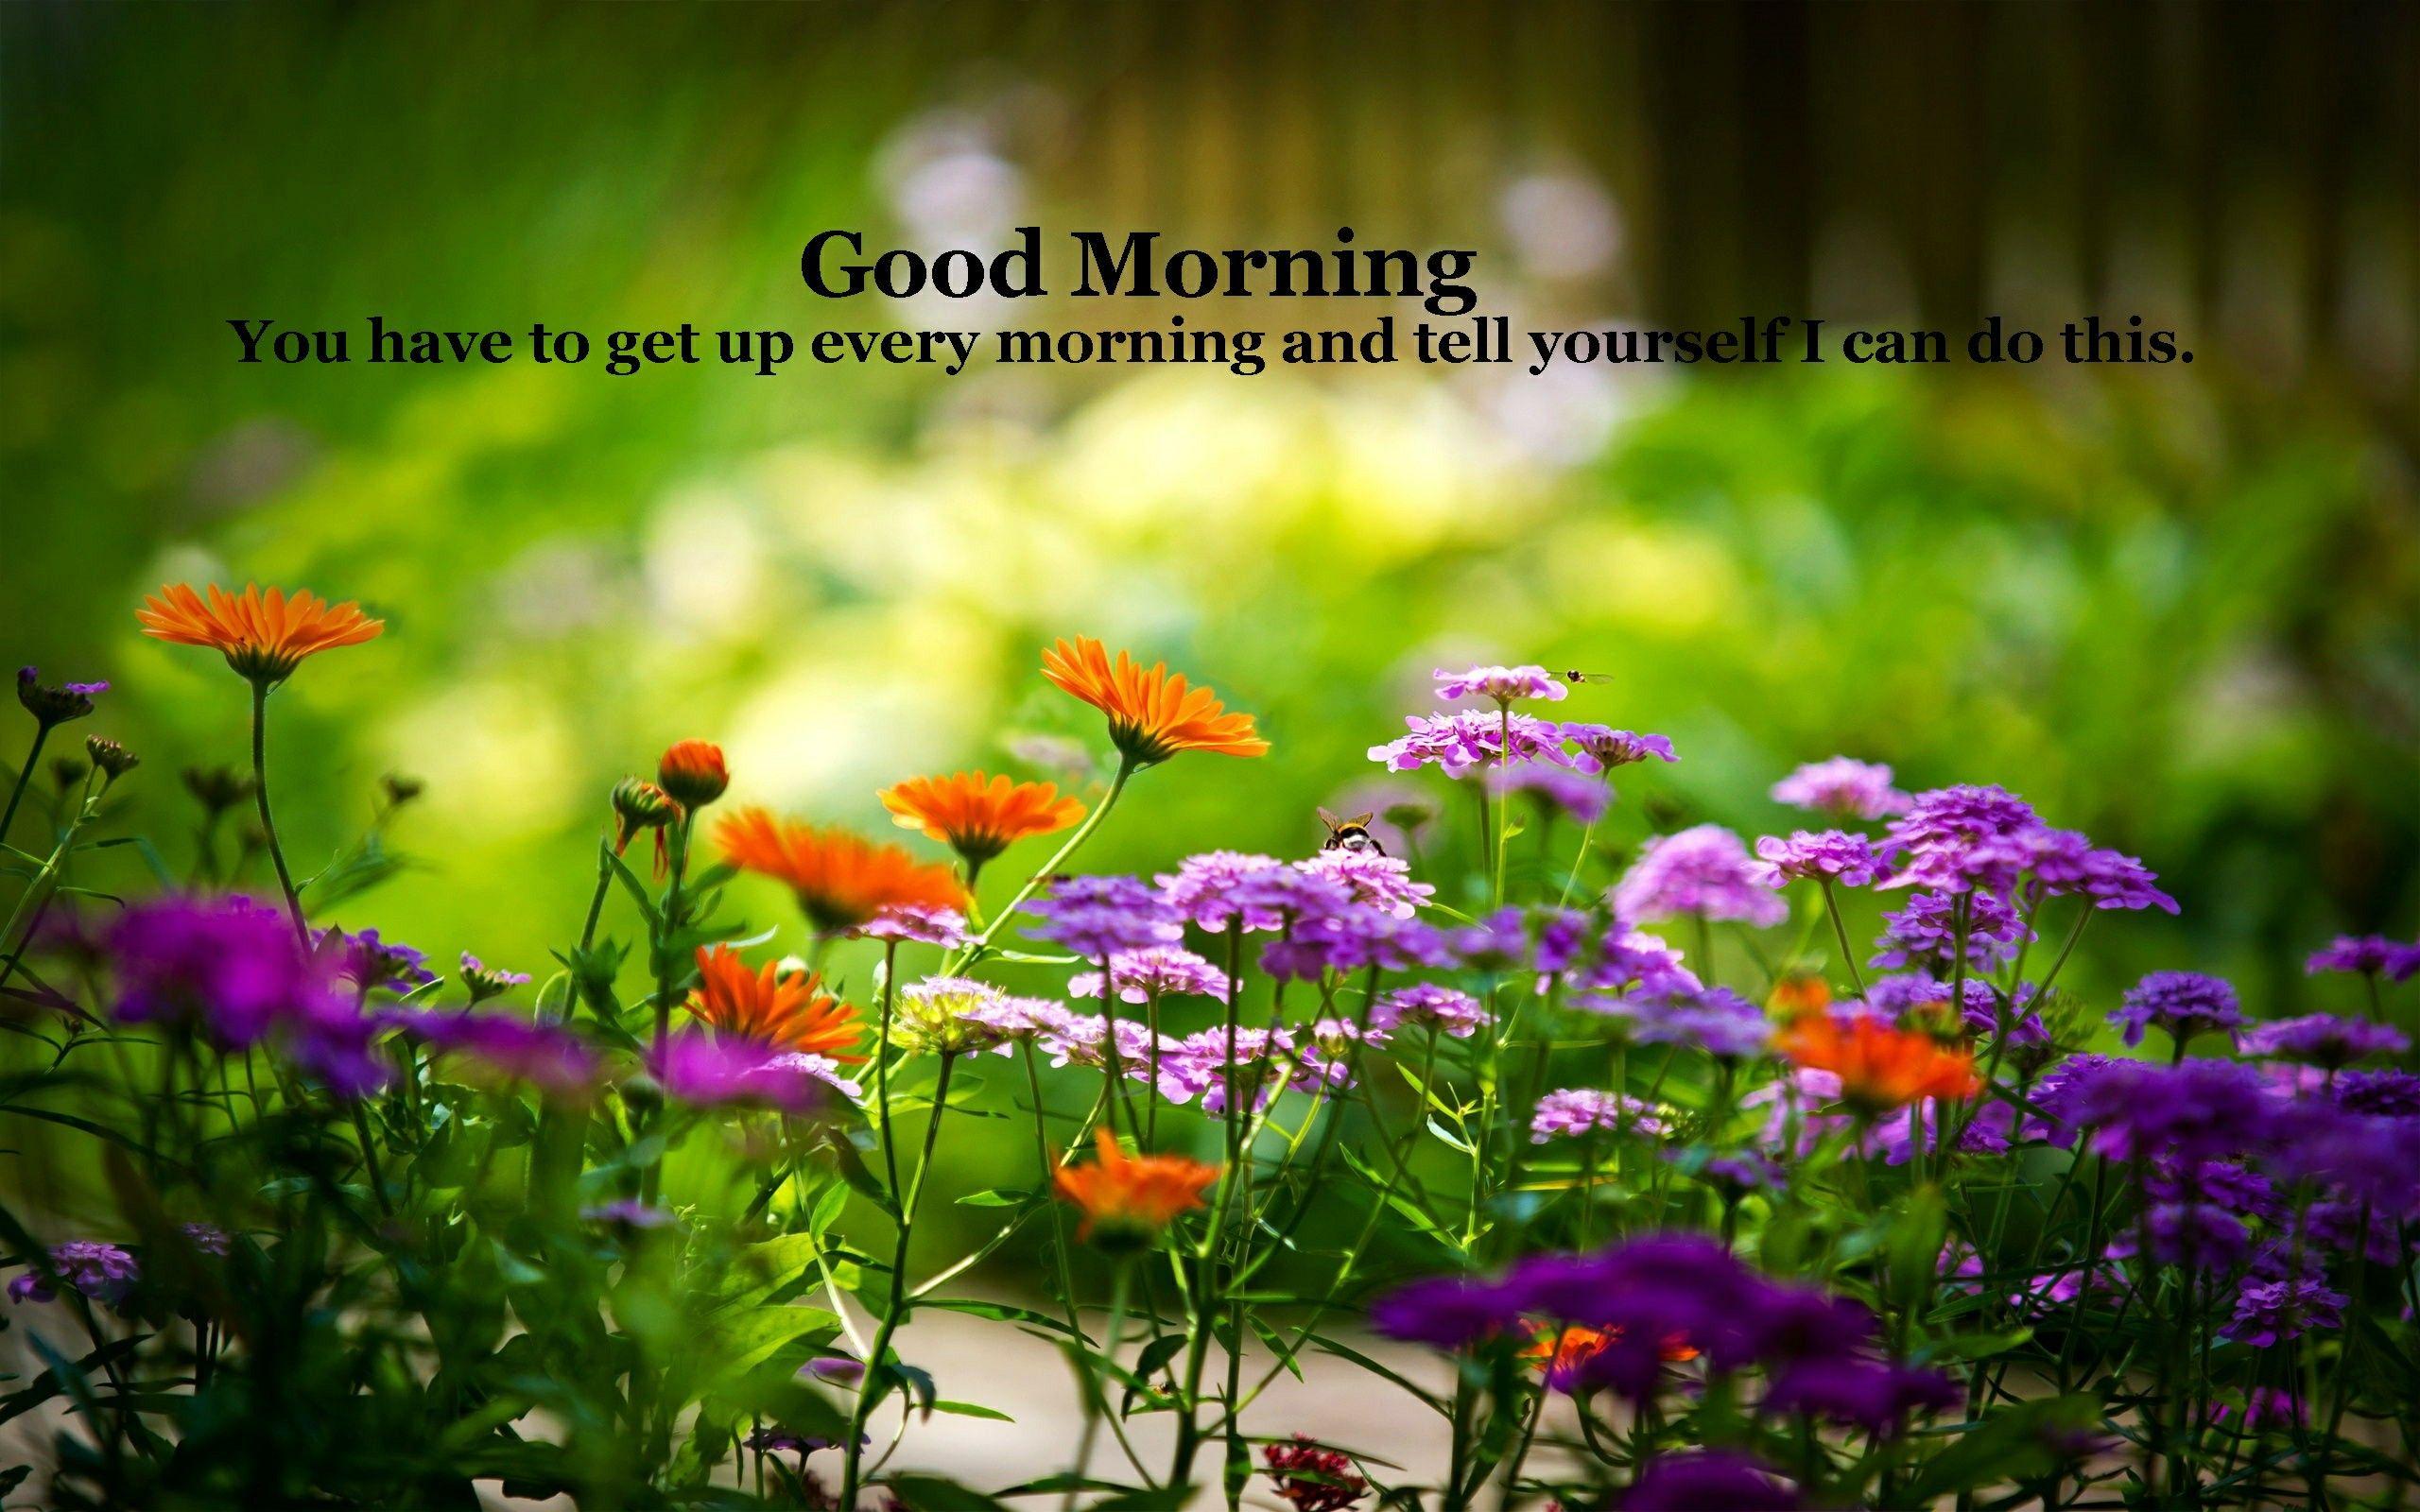 Wallpaper Latest Good Morning Love Image With Flowers For On